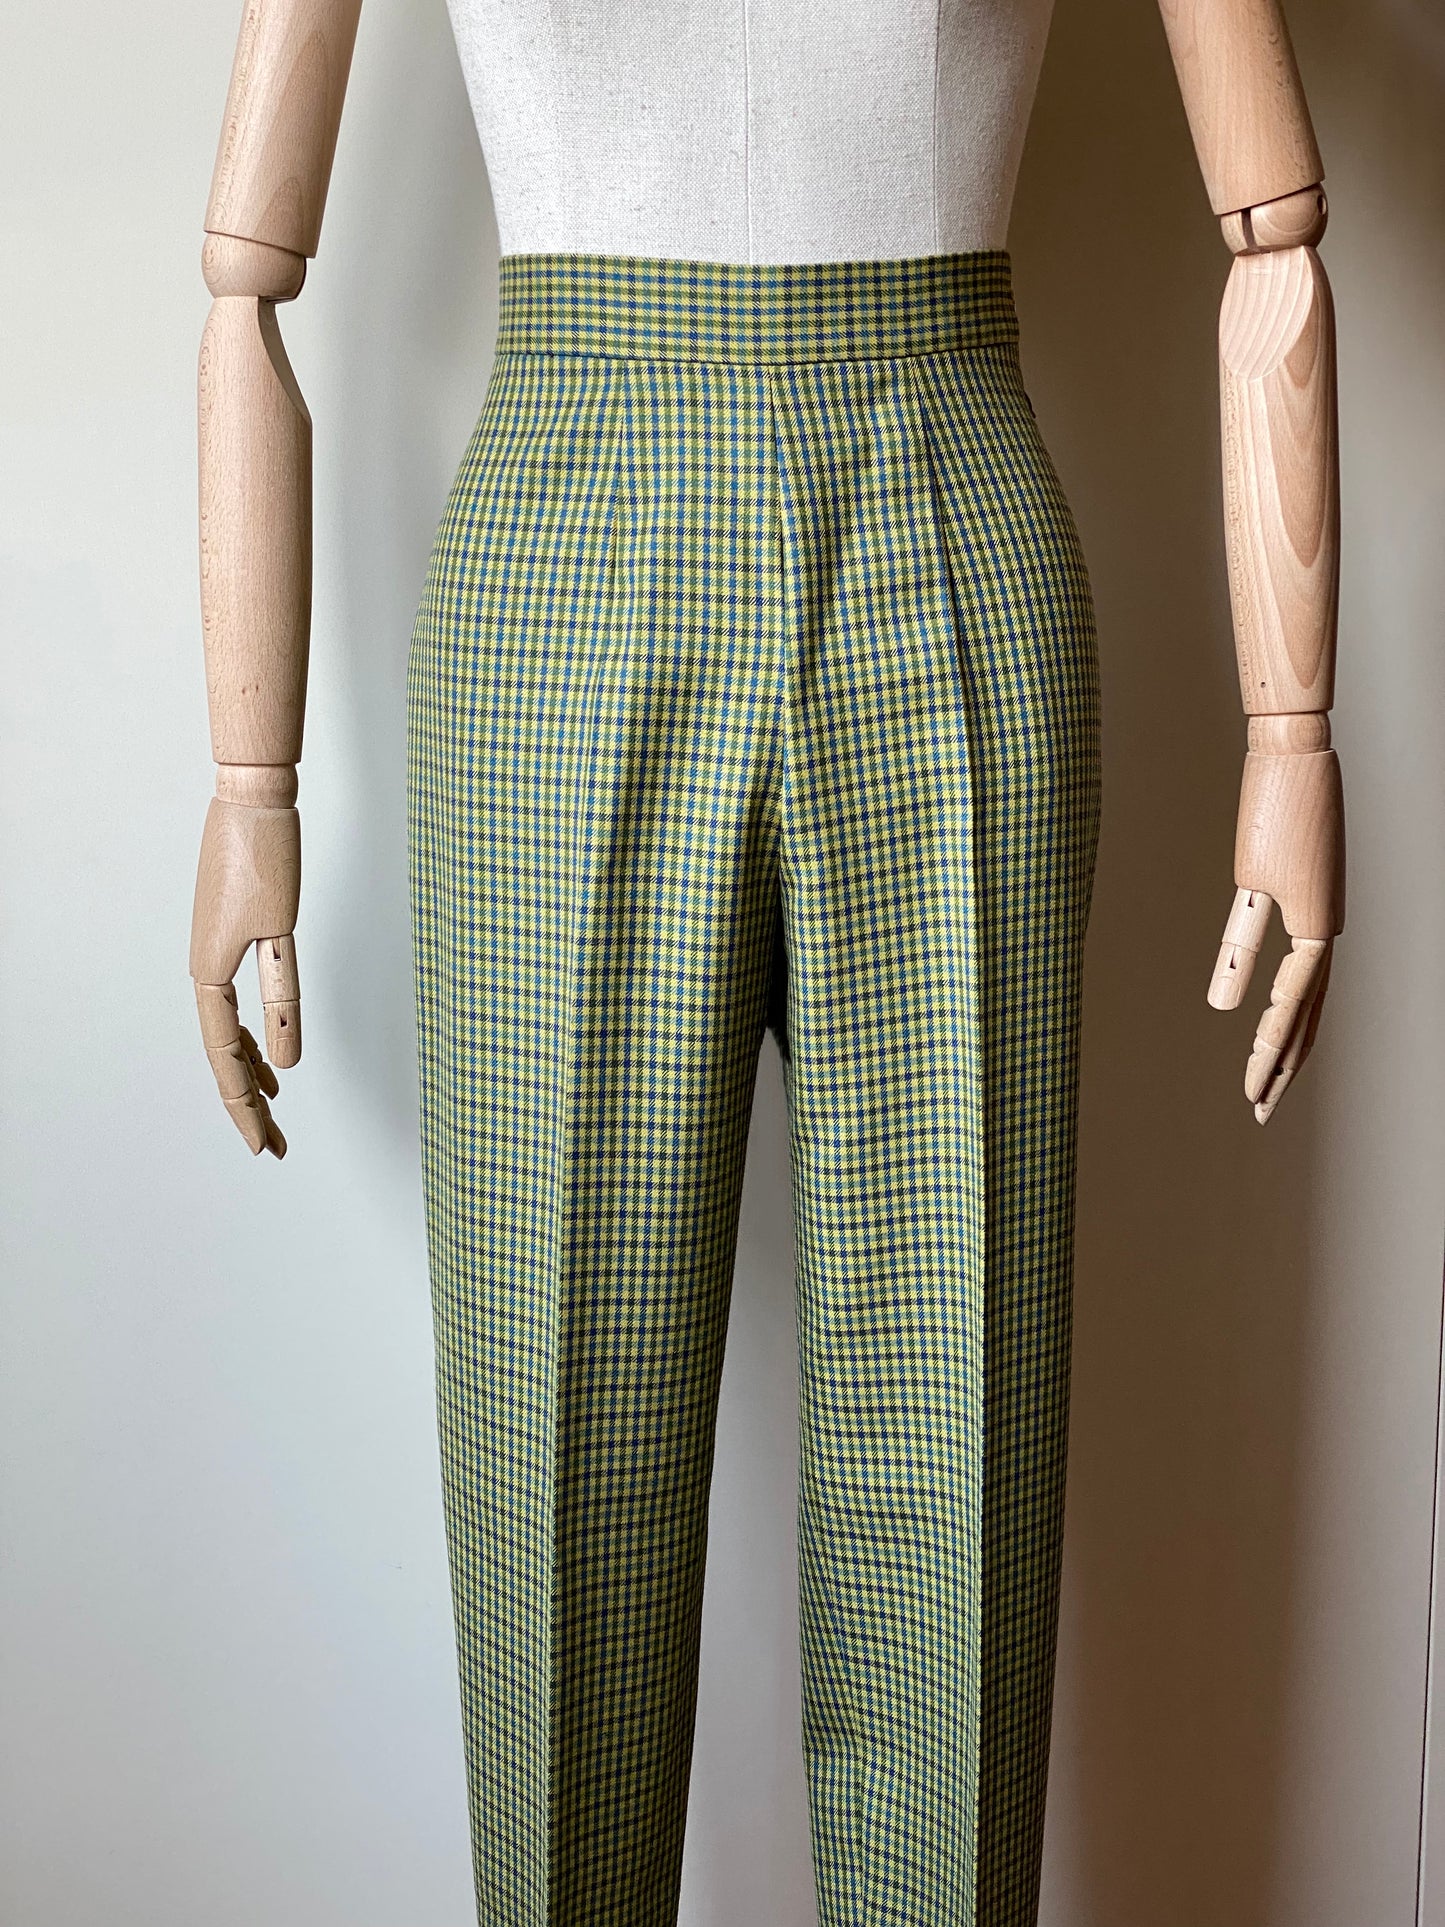 Vintage Moschino Checkered Trousers